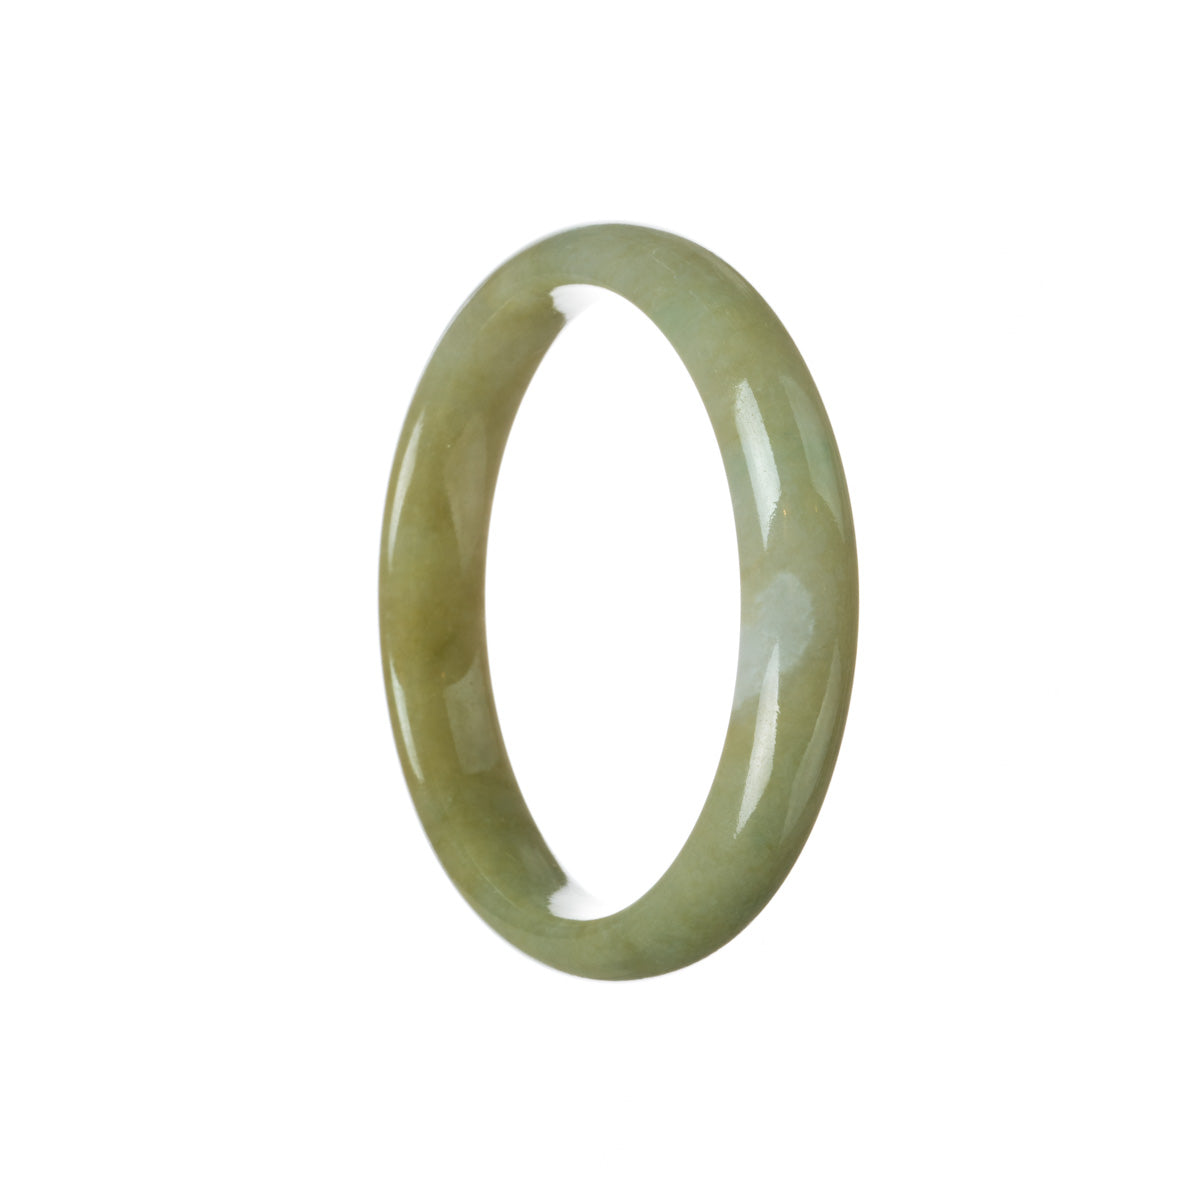 A genuine Type A brownish green with a white patch jadeite bangle bracelet. The bracelet features a 59mm half moon shape. Sold by MAYS GEMS.